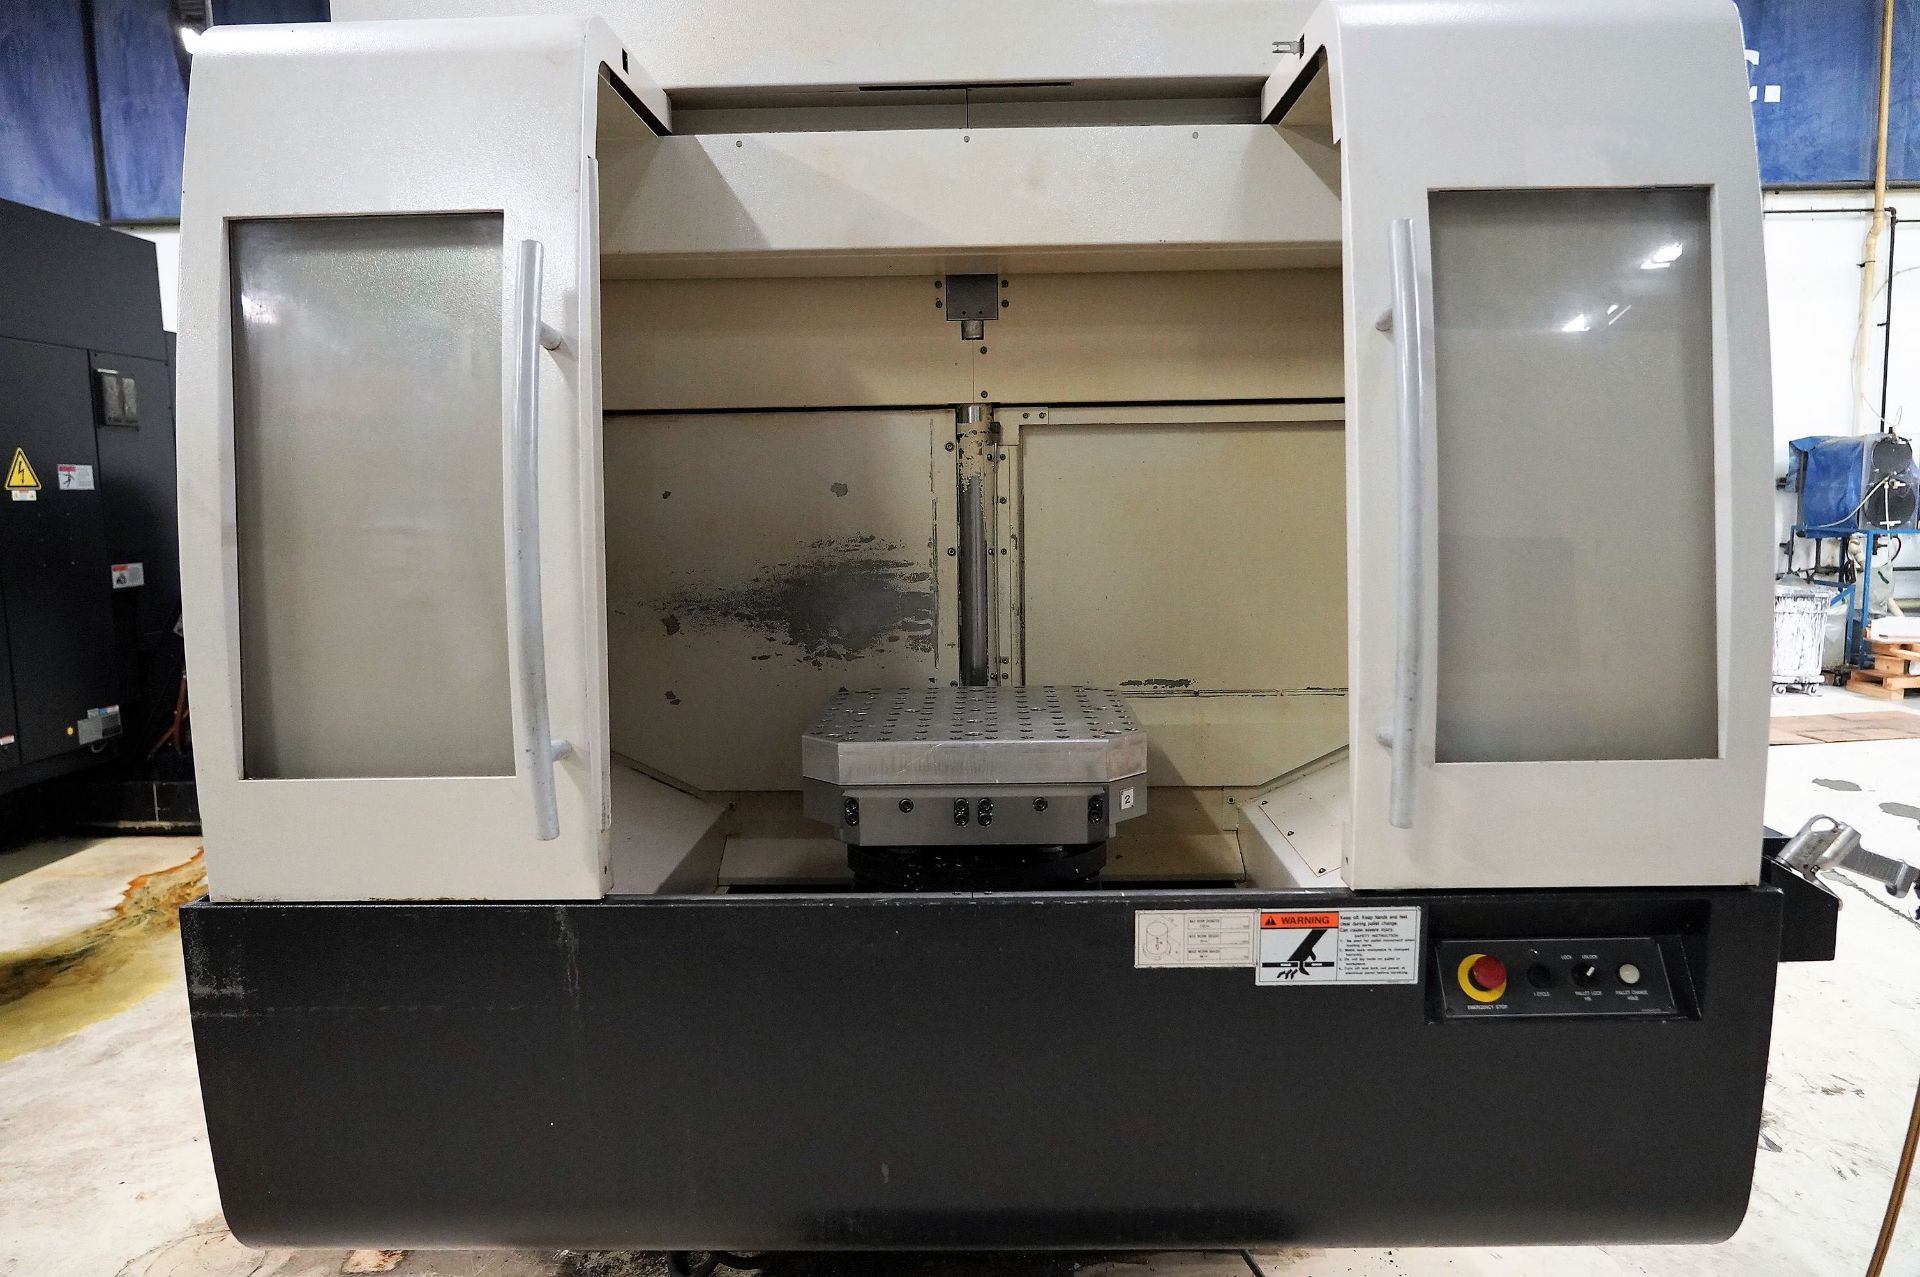 2008 Mazak Variax 630-5X-II 5-Axis CNC Vertical Machining Center With Trunnion Table, Pallet Changer - Image 3 of 17